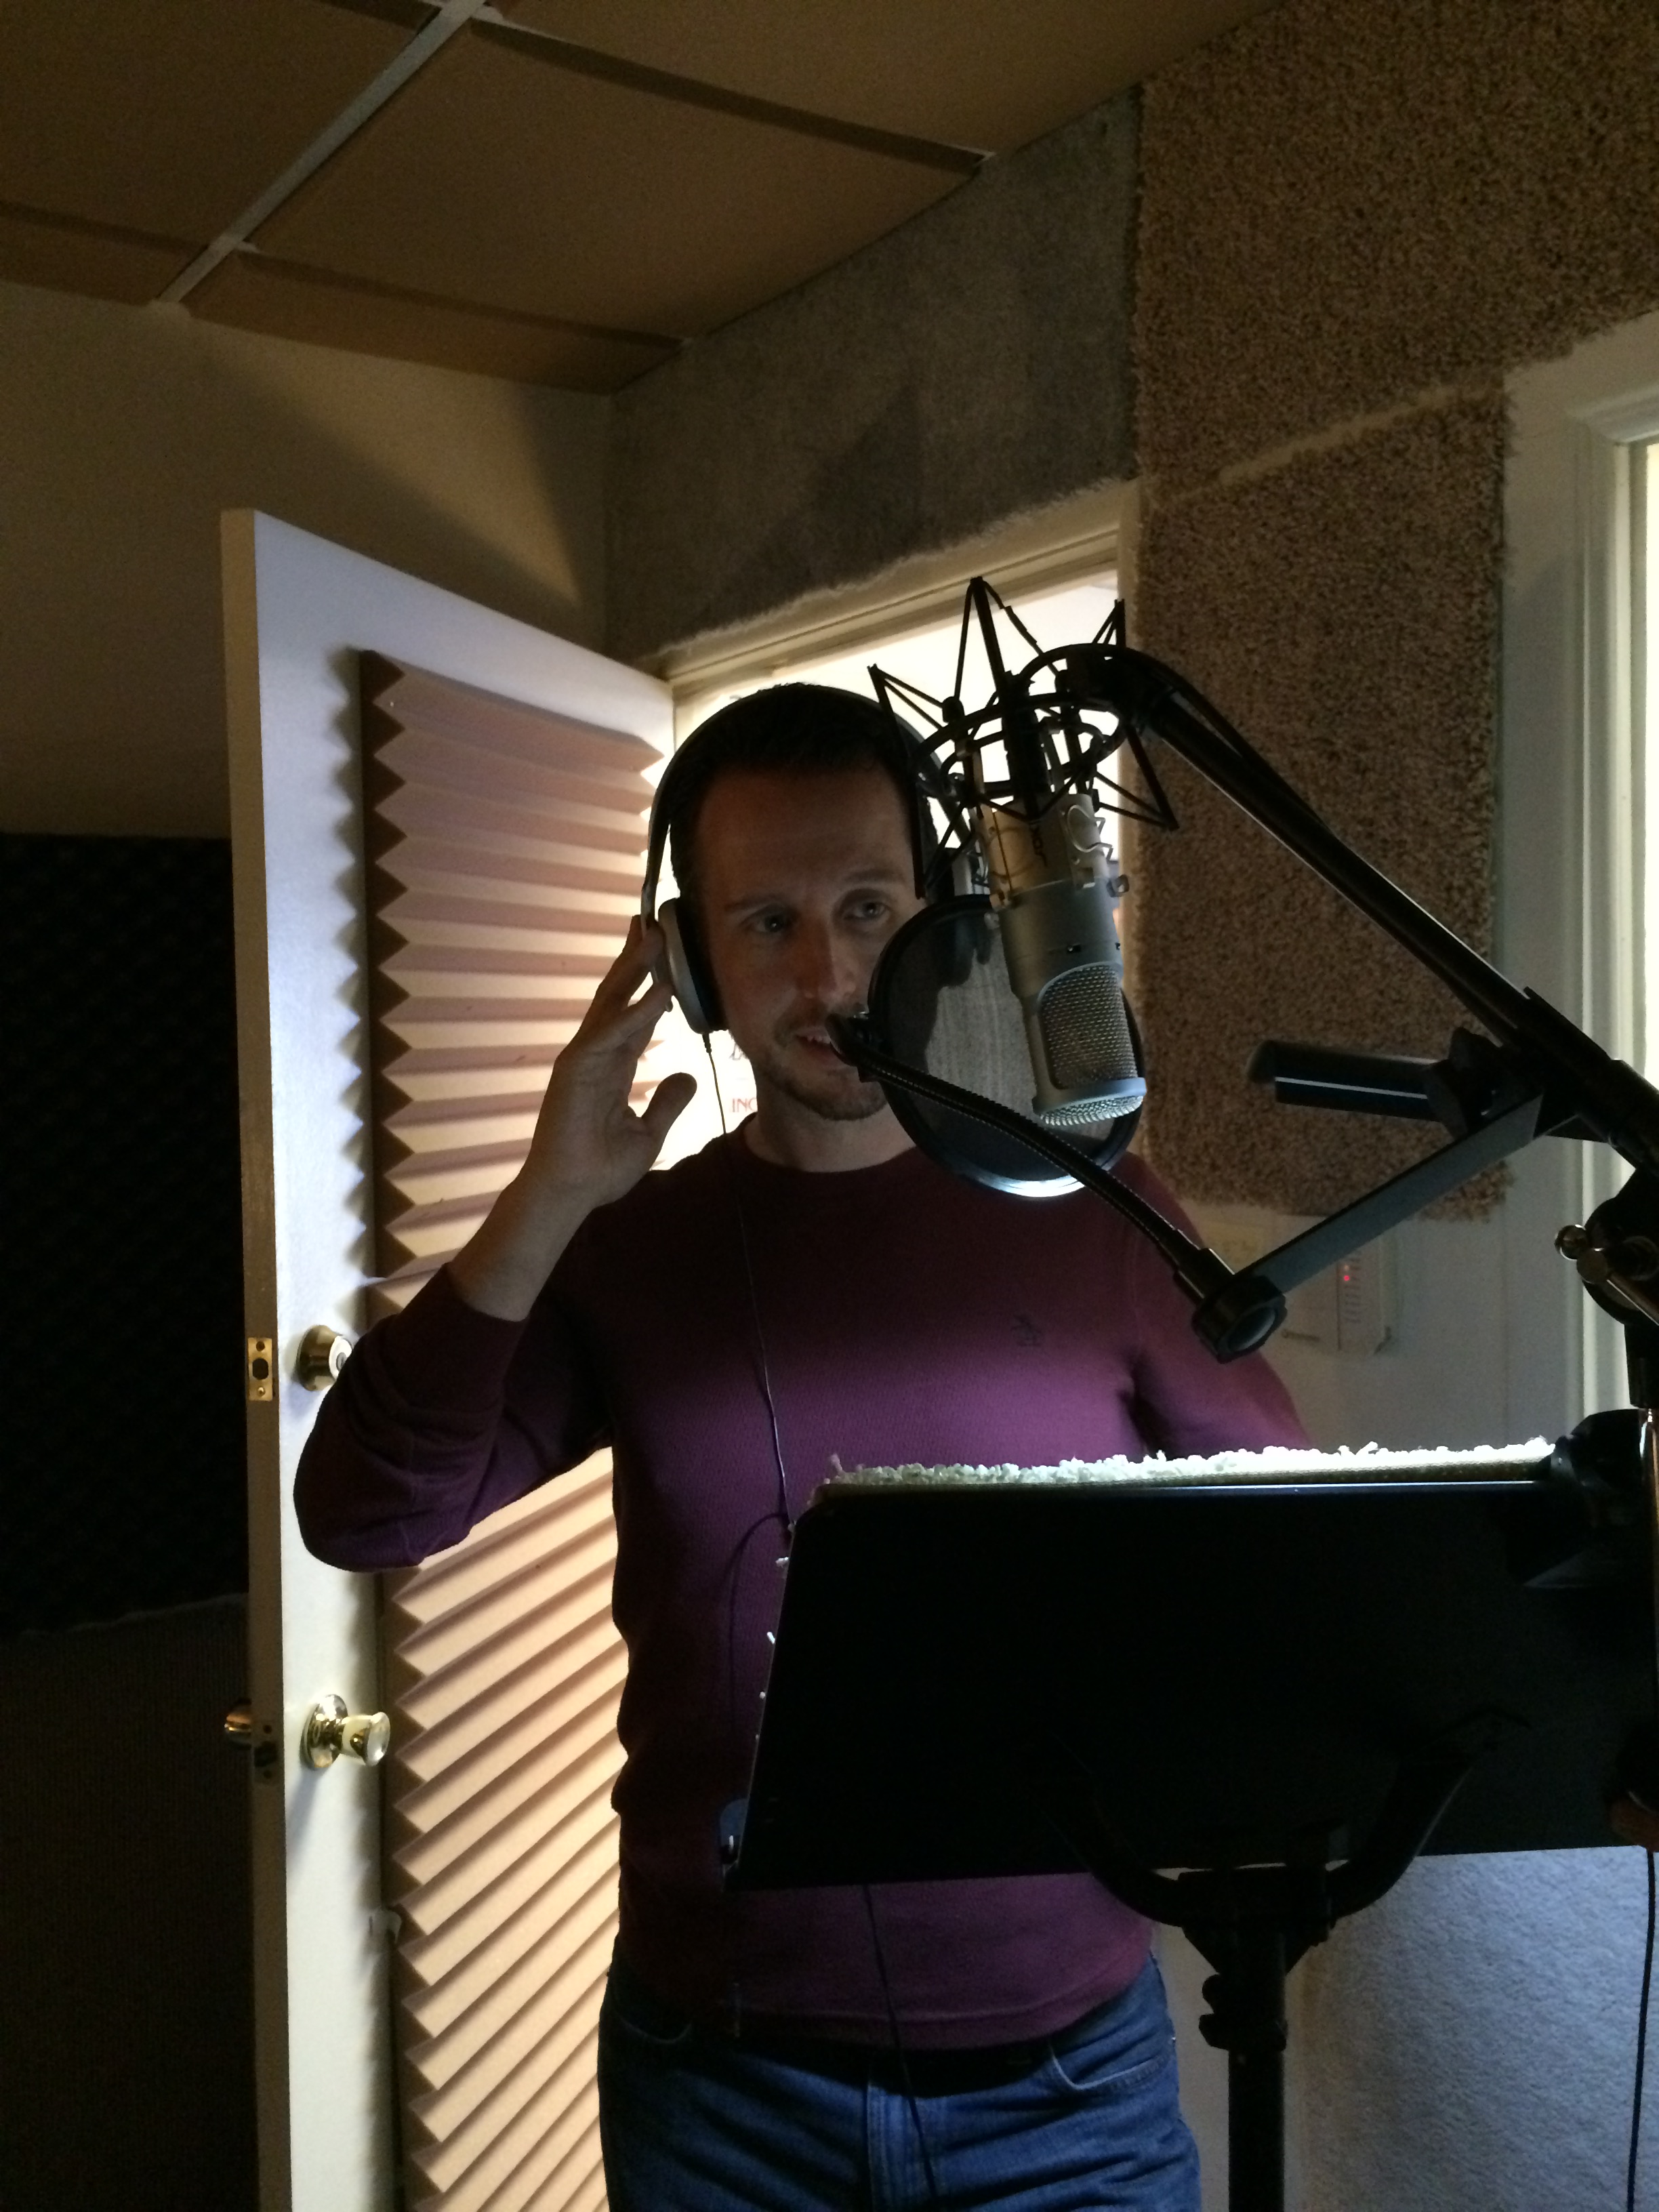 Still of Jason Wages during voice over recording session